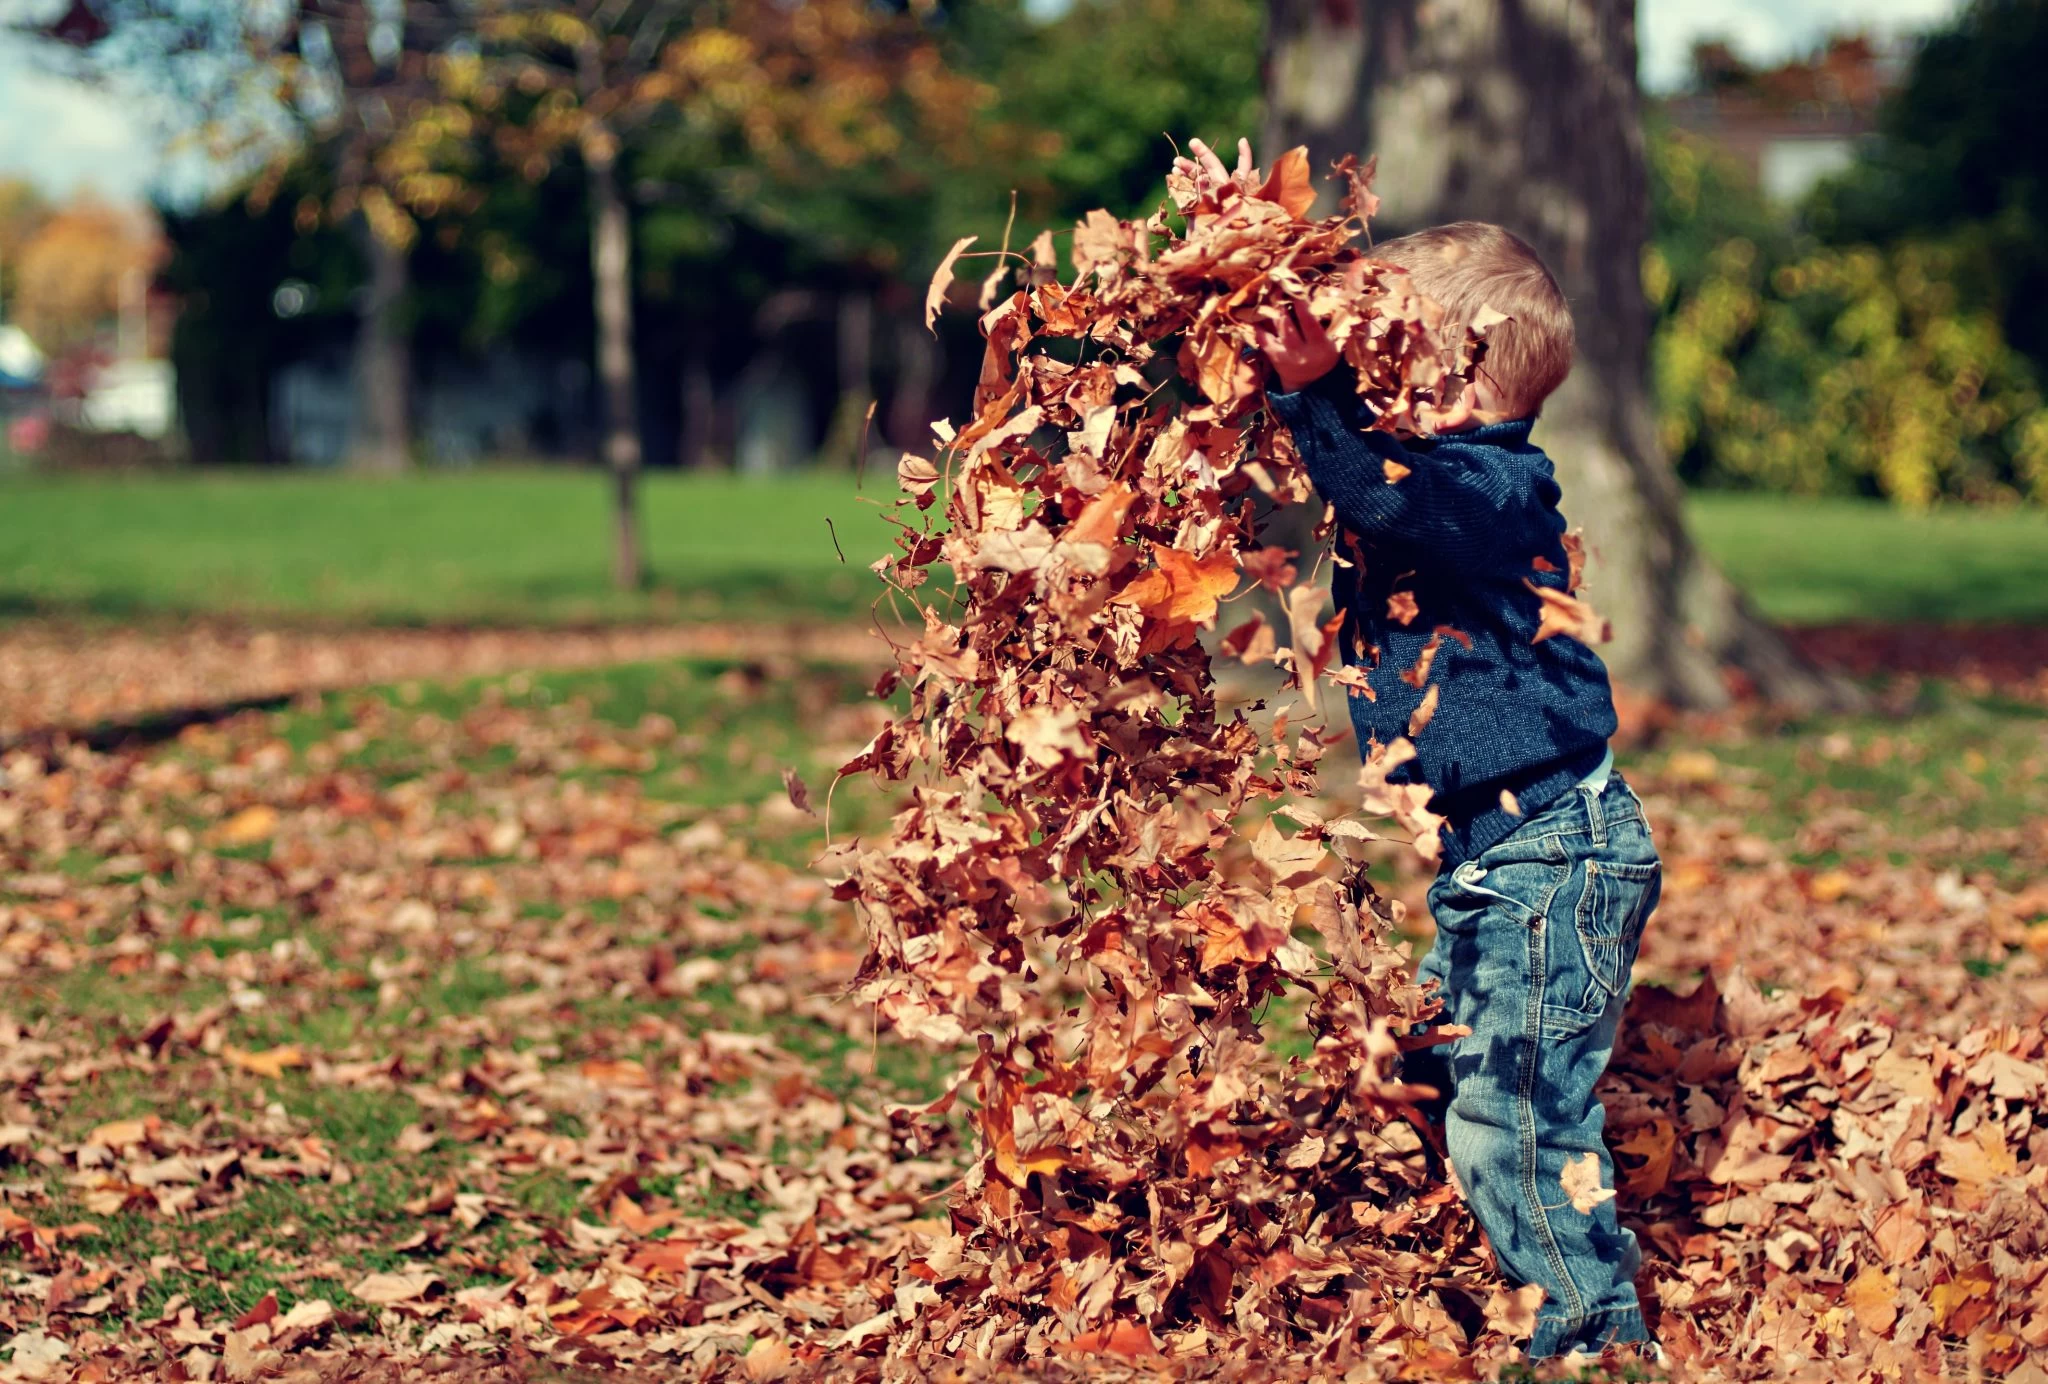 On the first day of fall, a young boy joyfully plays with colorful leaves in a park.